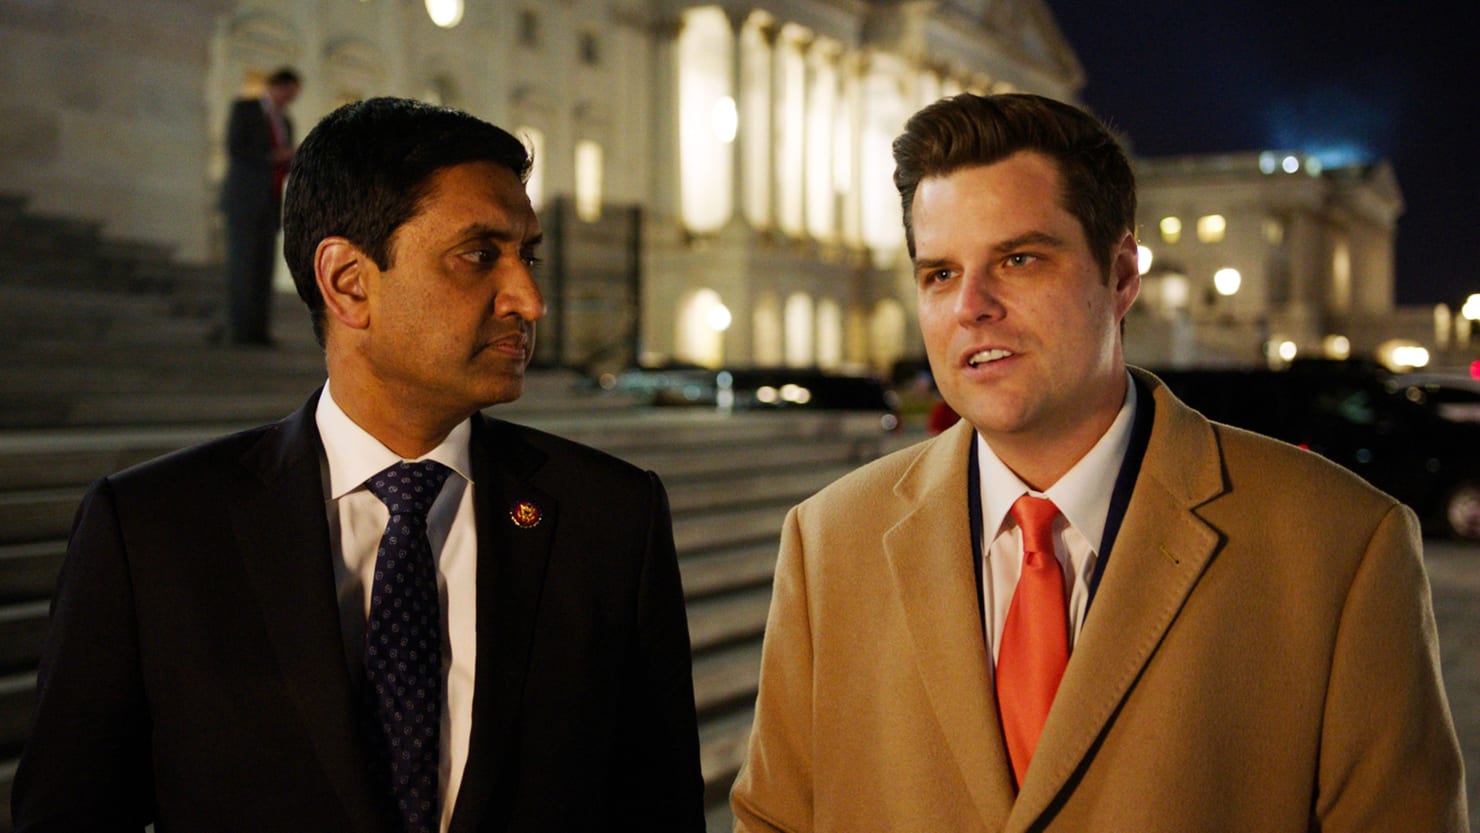 Democratic Rep Ro Khanna silently moves away from Matt Gaetz after claiming they ‘left’